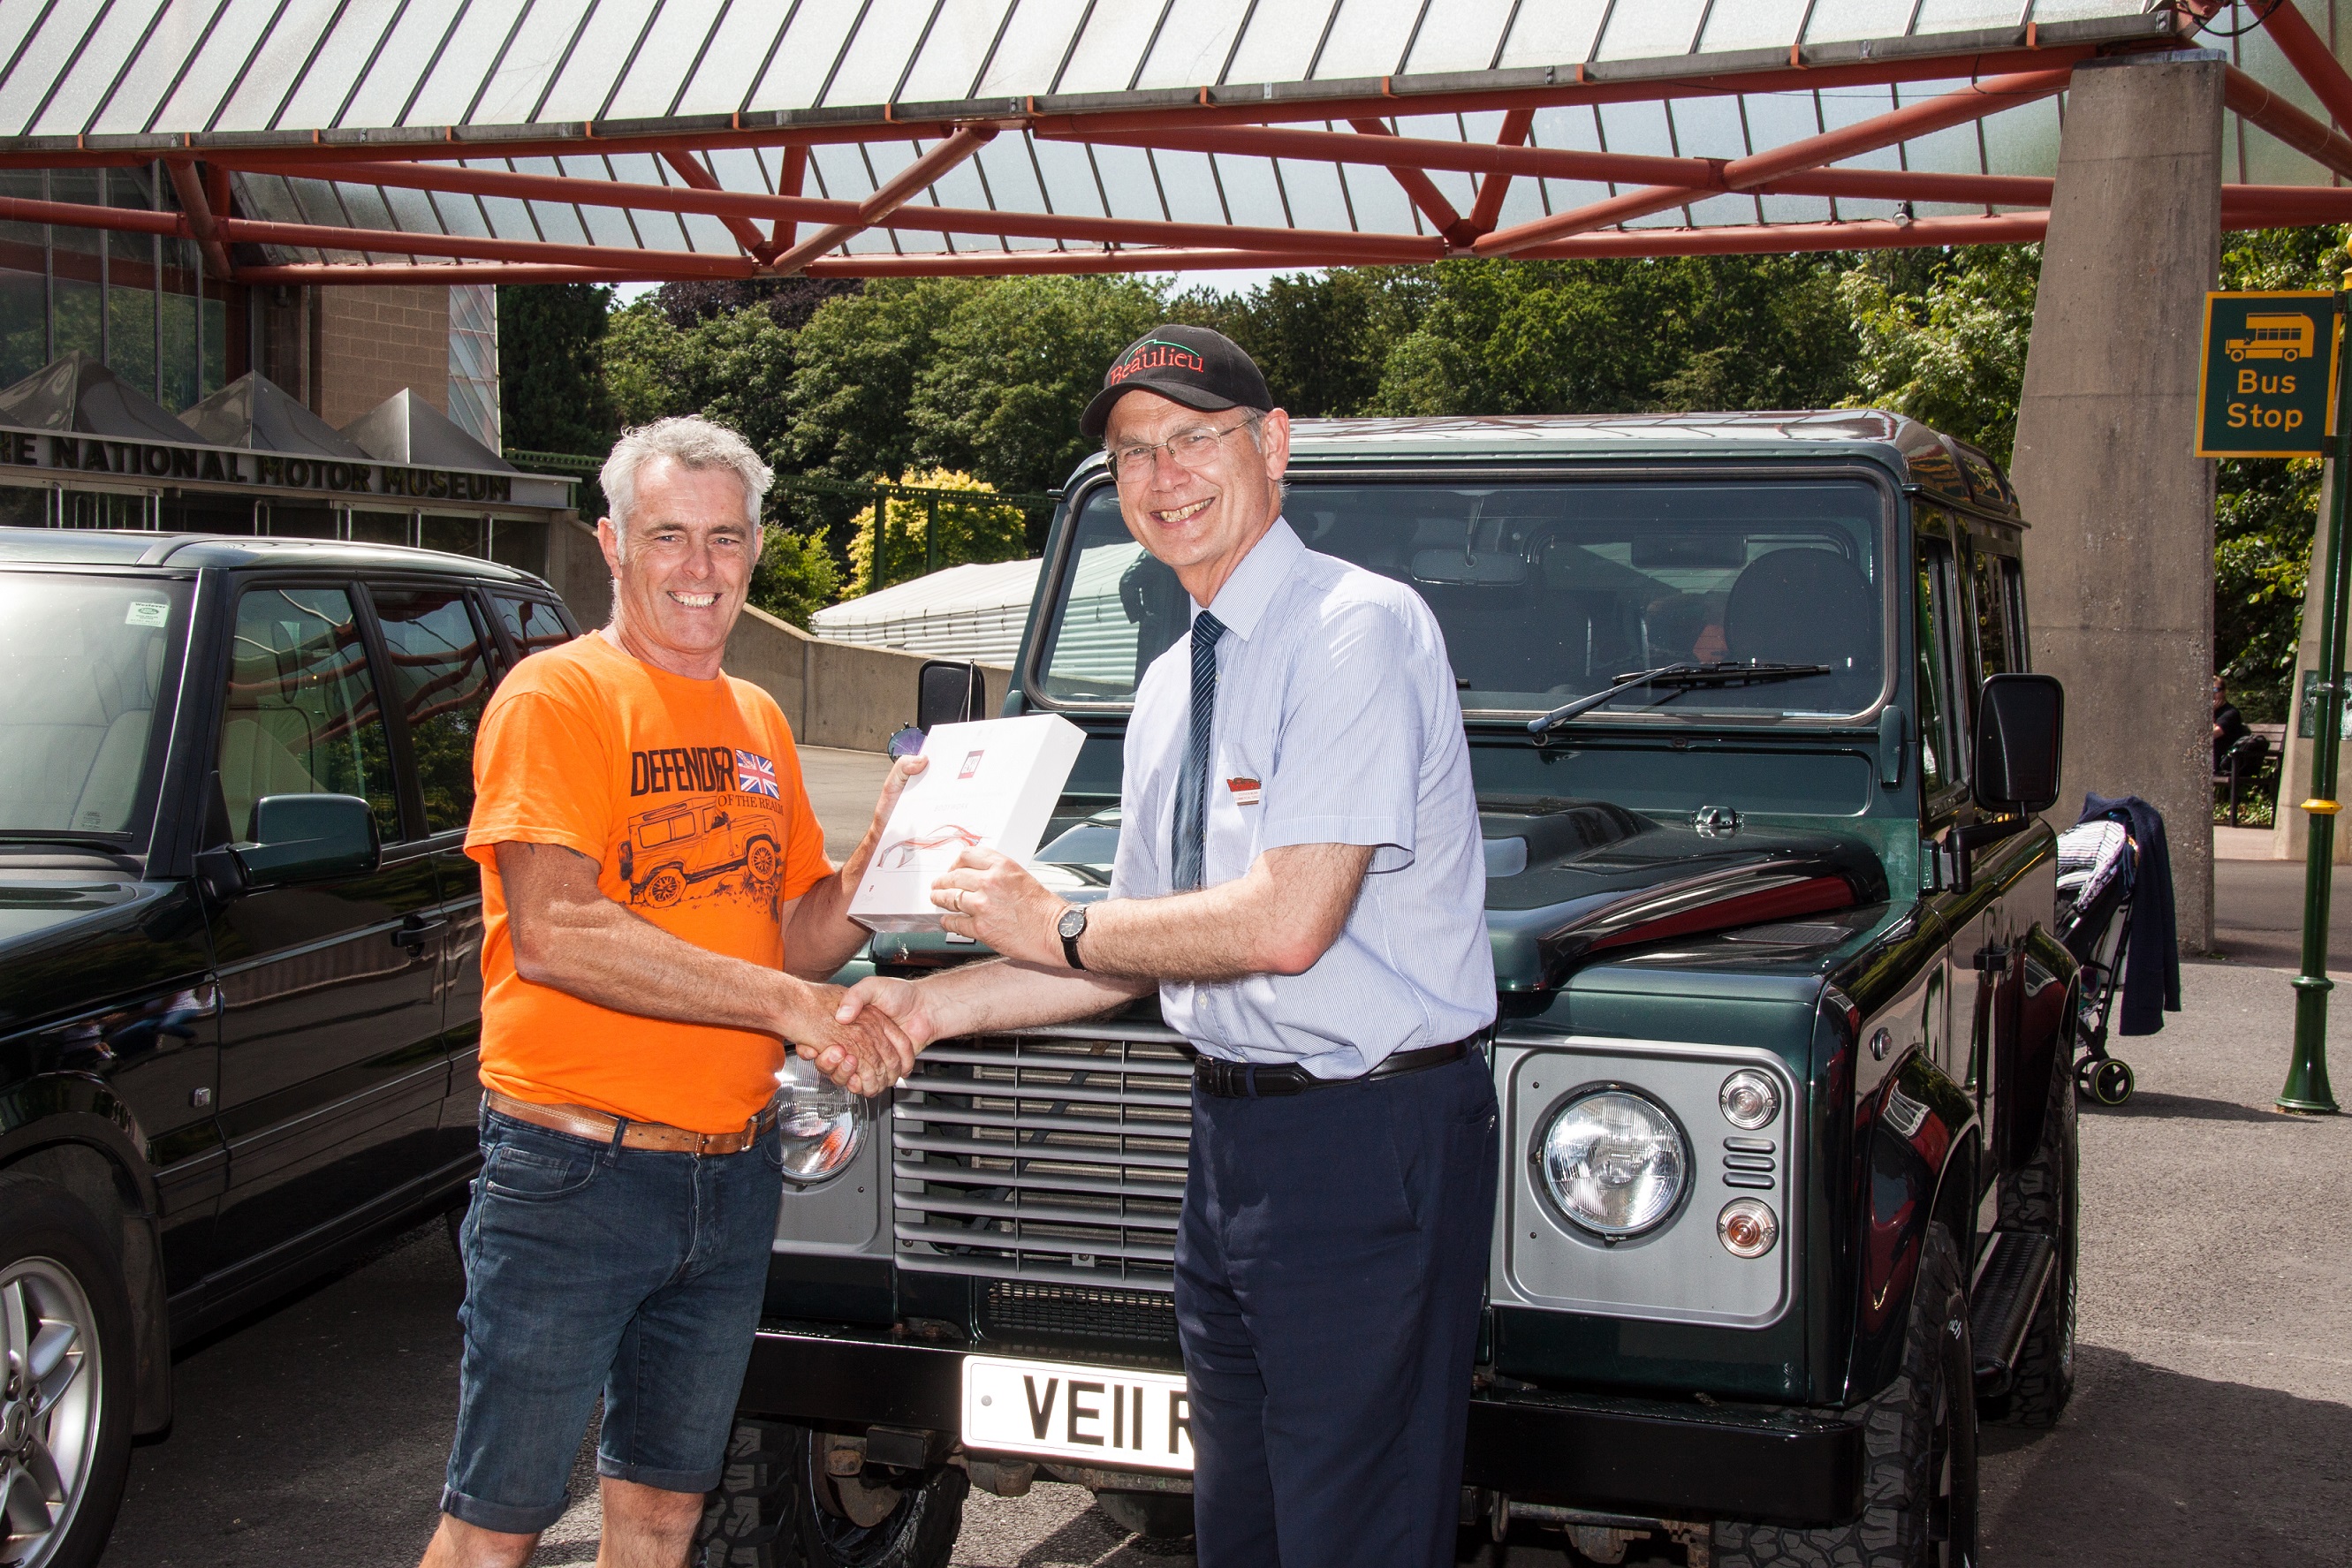 Simply Land Rover People's Choice runner up Michael Smith being presented with prize by Beaulieu Commercial Director Steve Munn